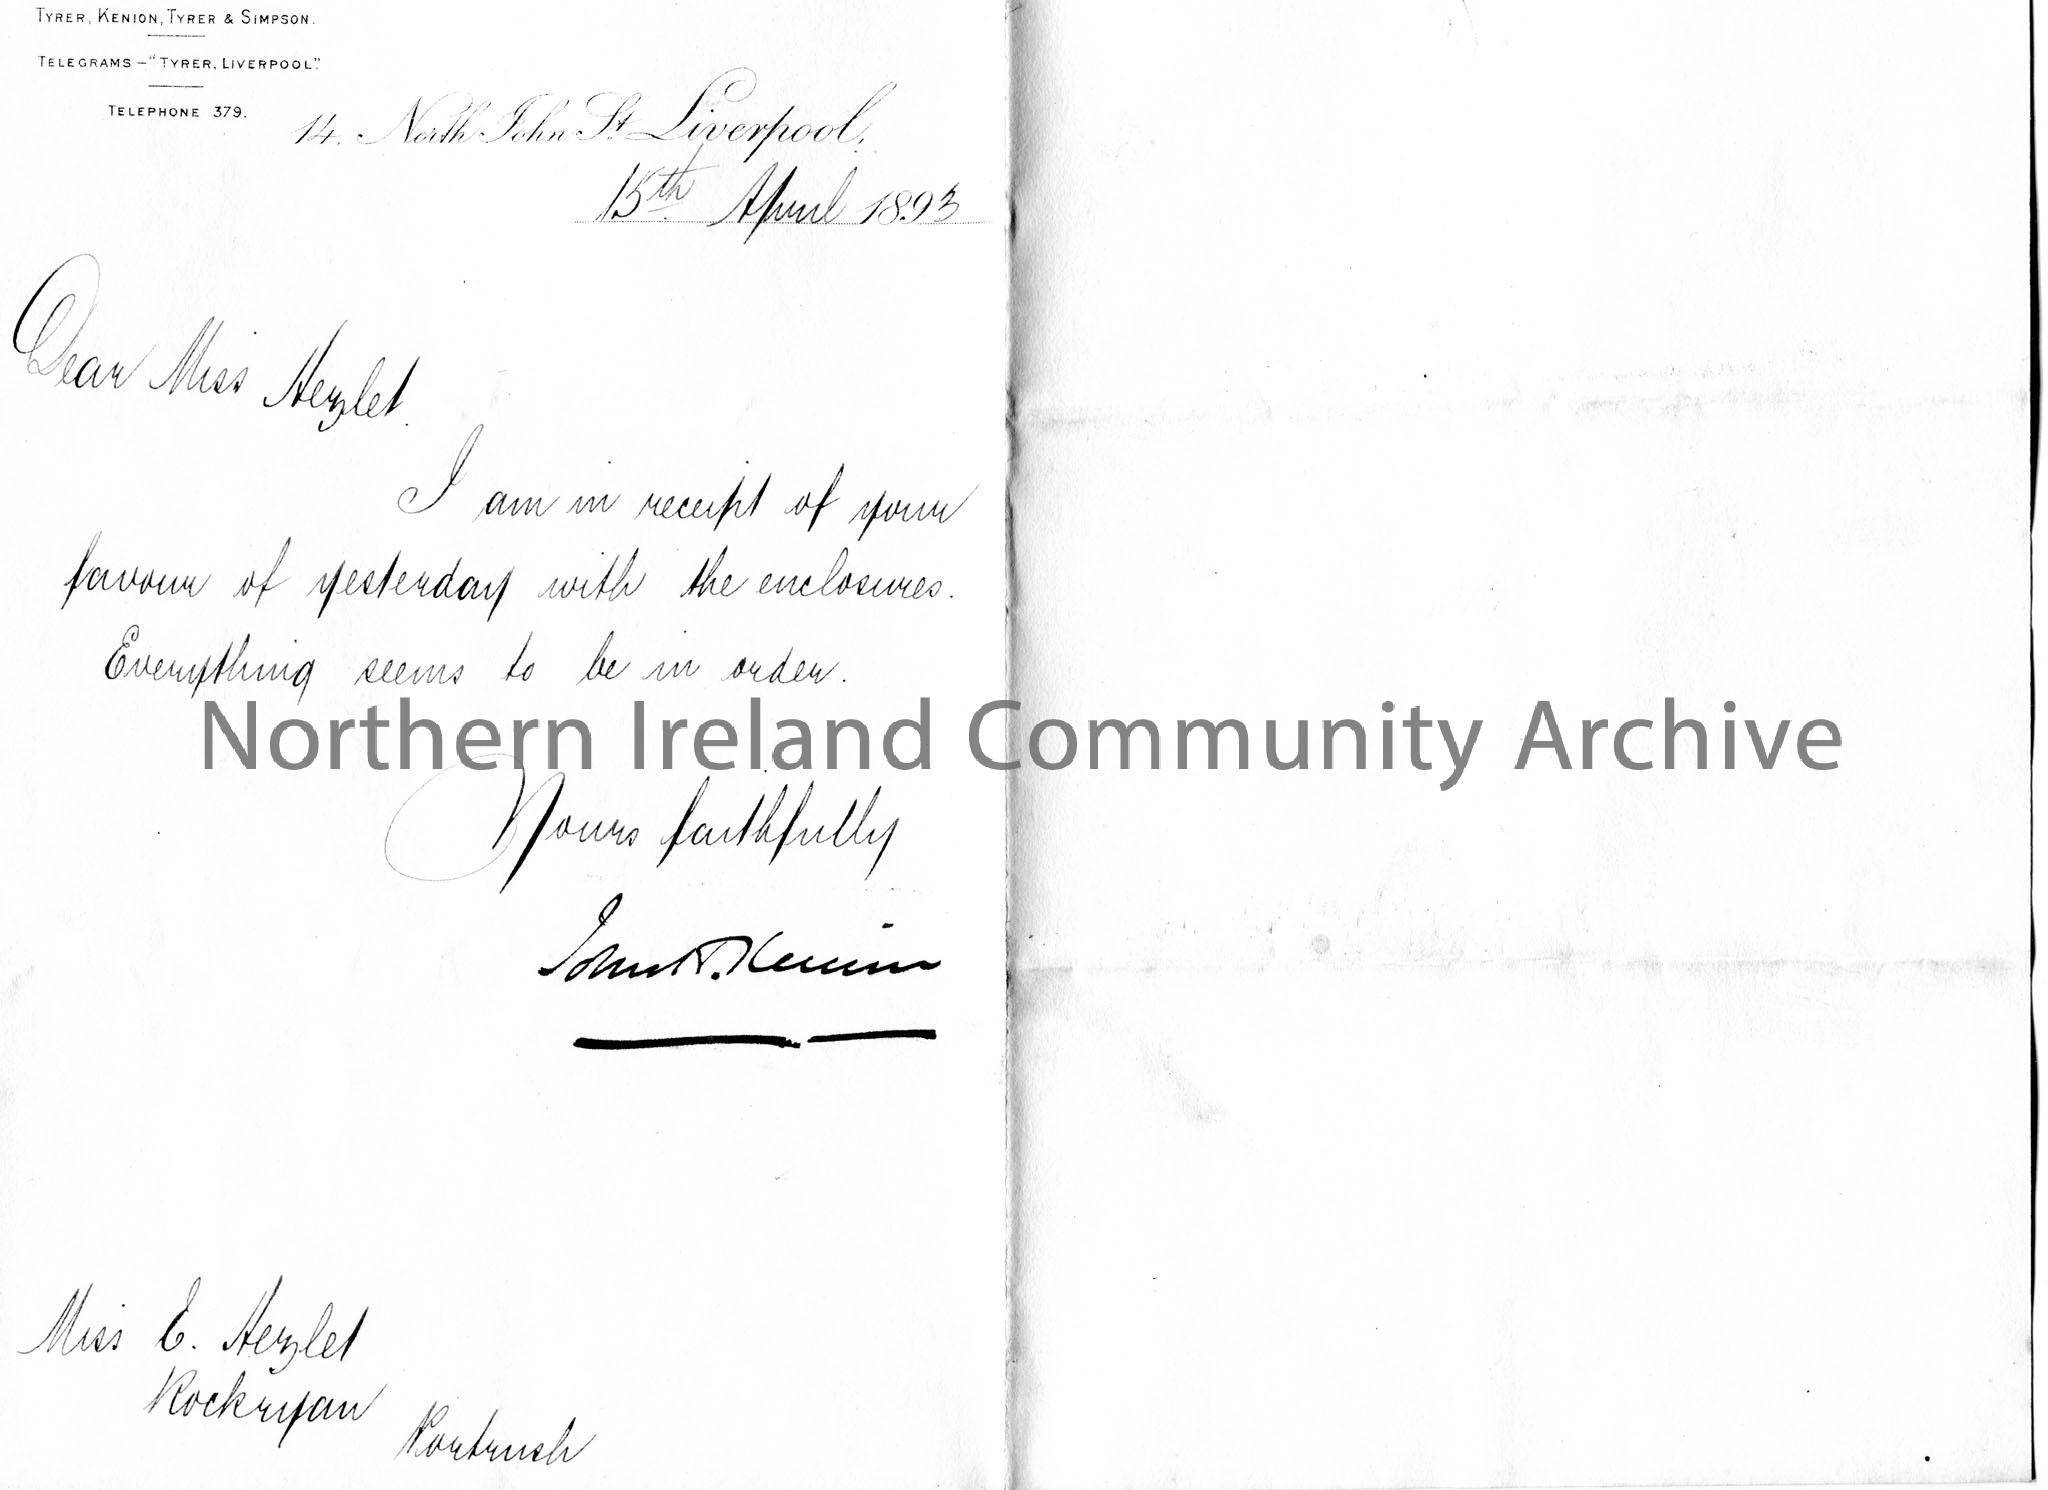 Handwritten letter to Miss E. Hezlet at Rockryan, Portrush. Acknowledges enclosures sent from Miss Hezlet.